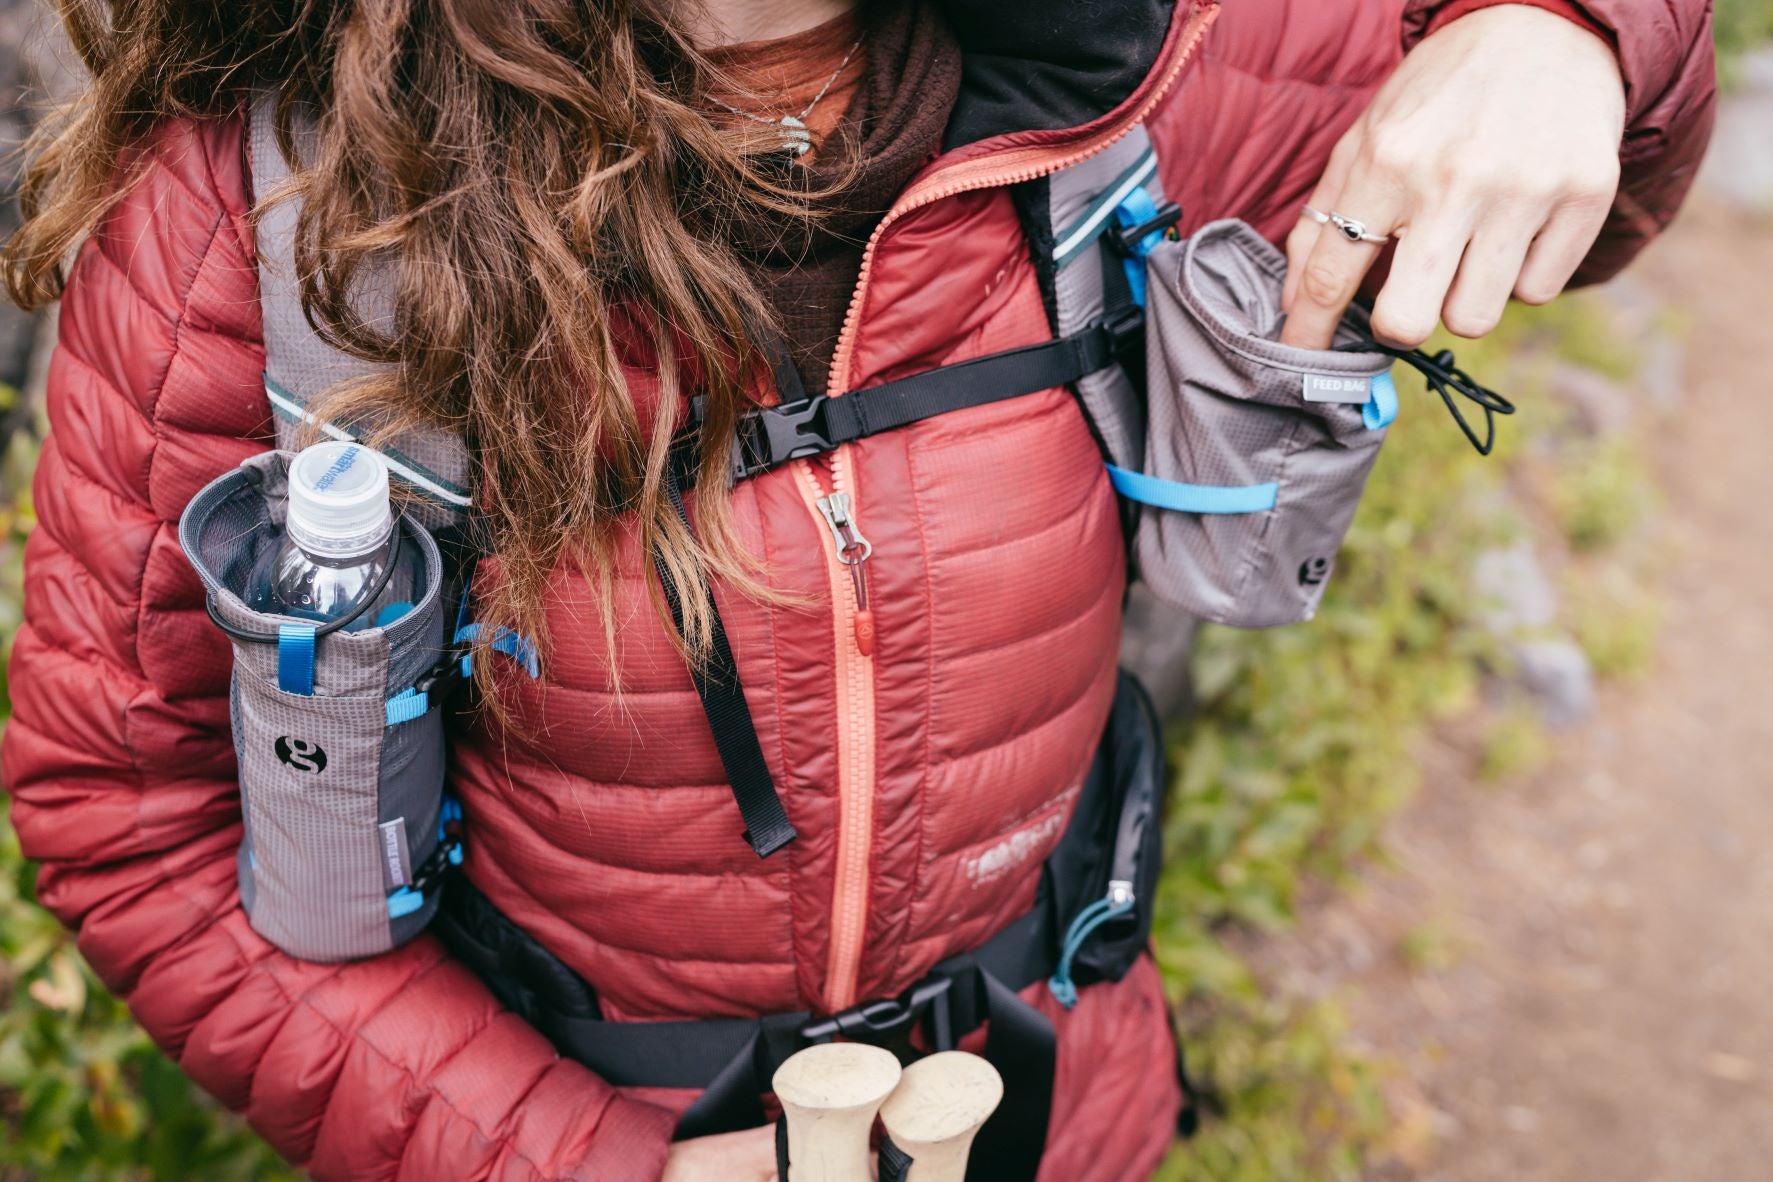 Where Do I Put My Waterbottles When Backpacking? - Backpacking Light